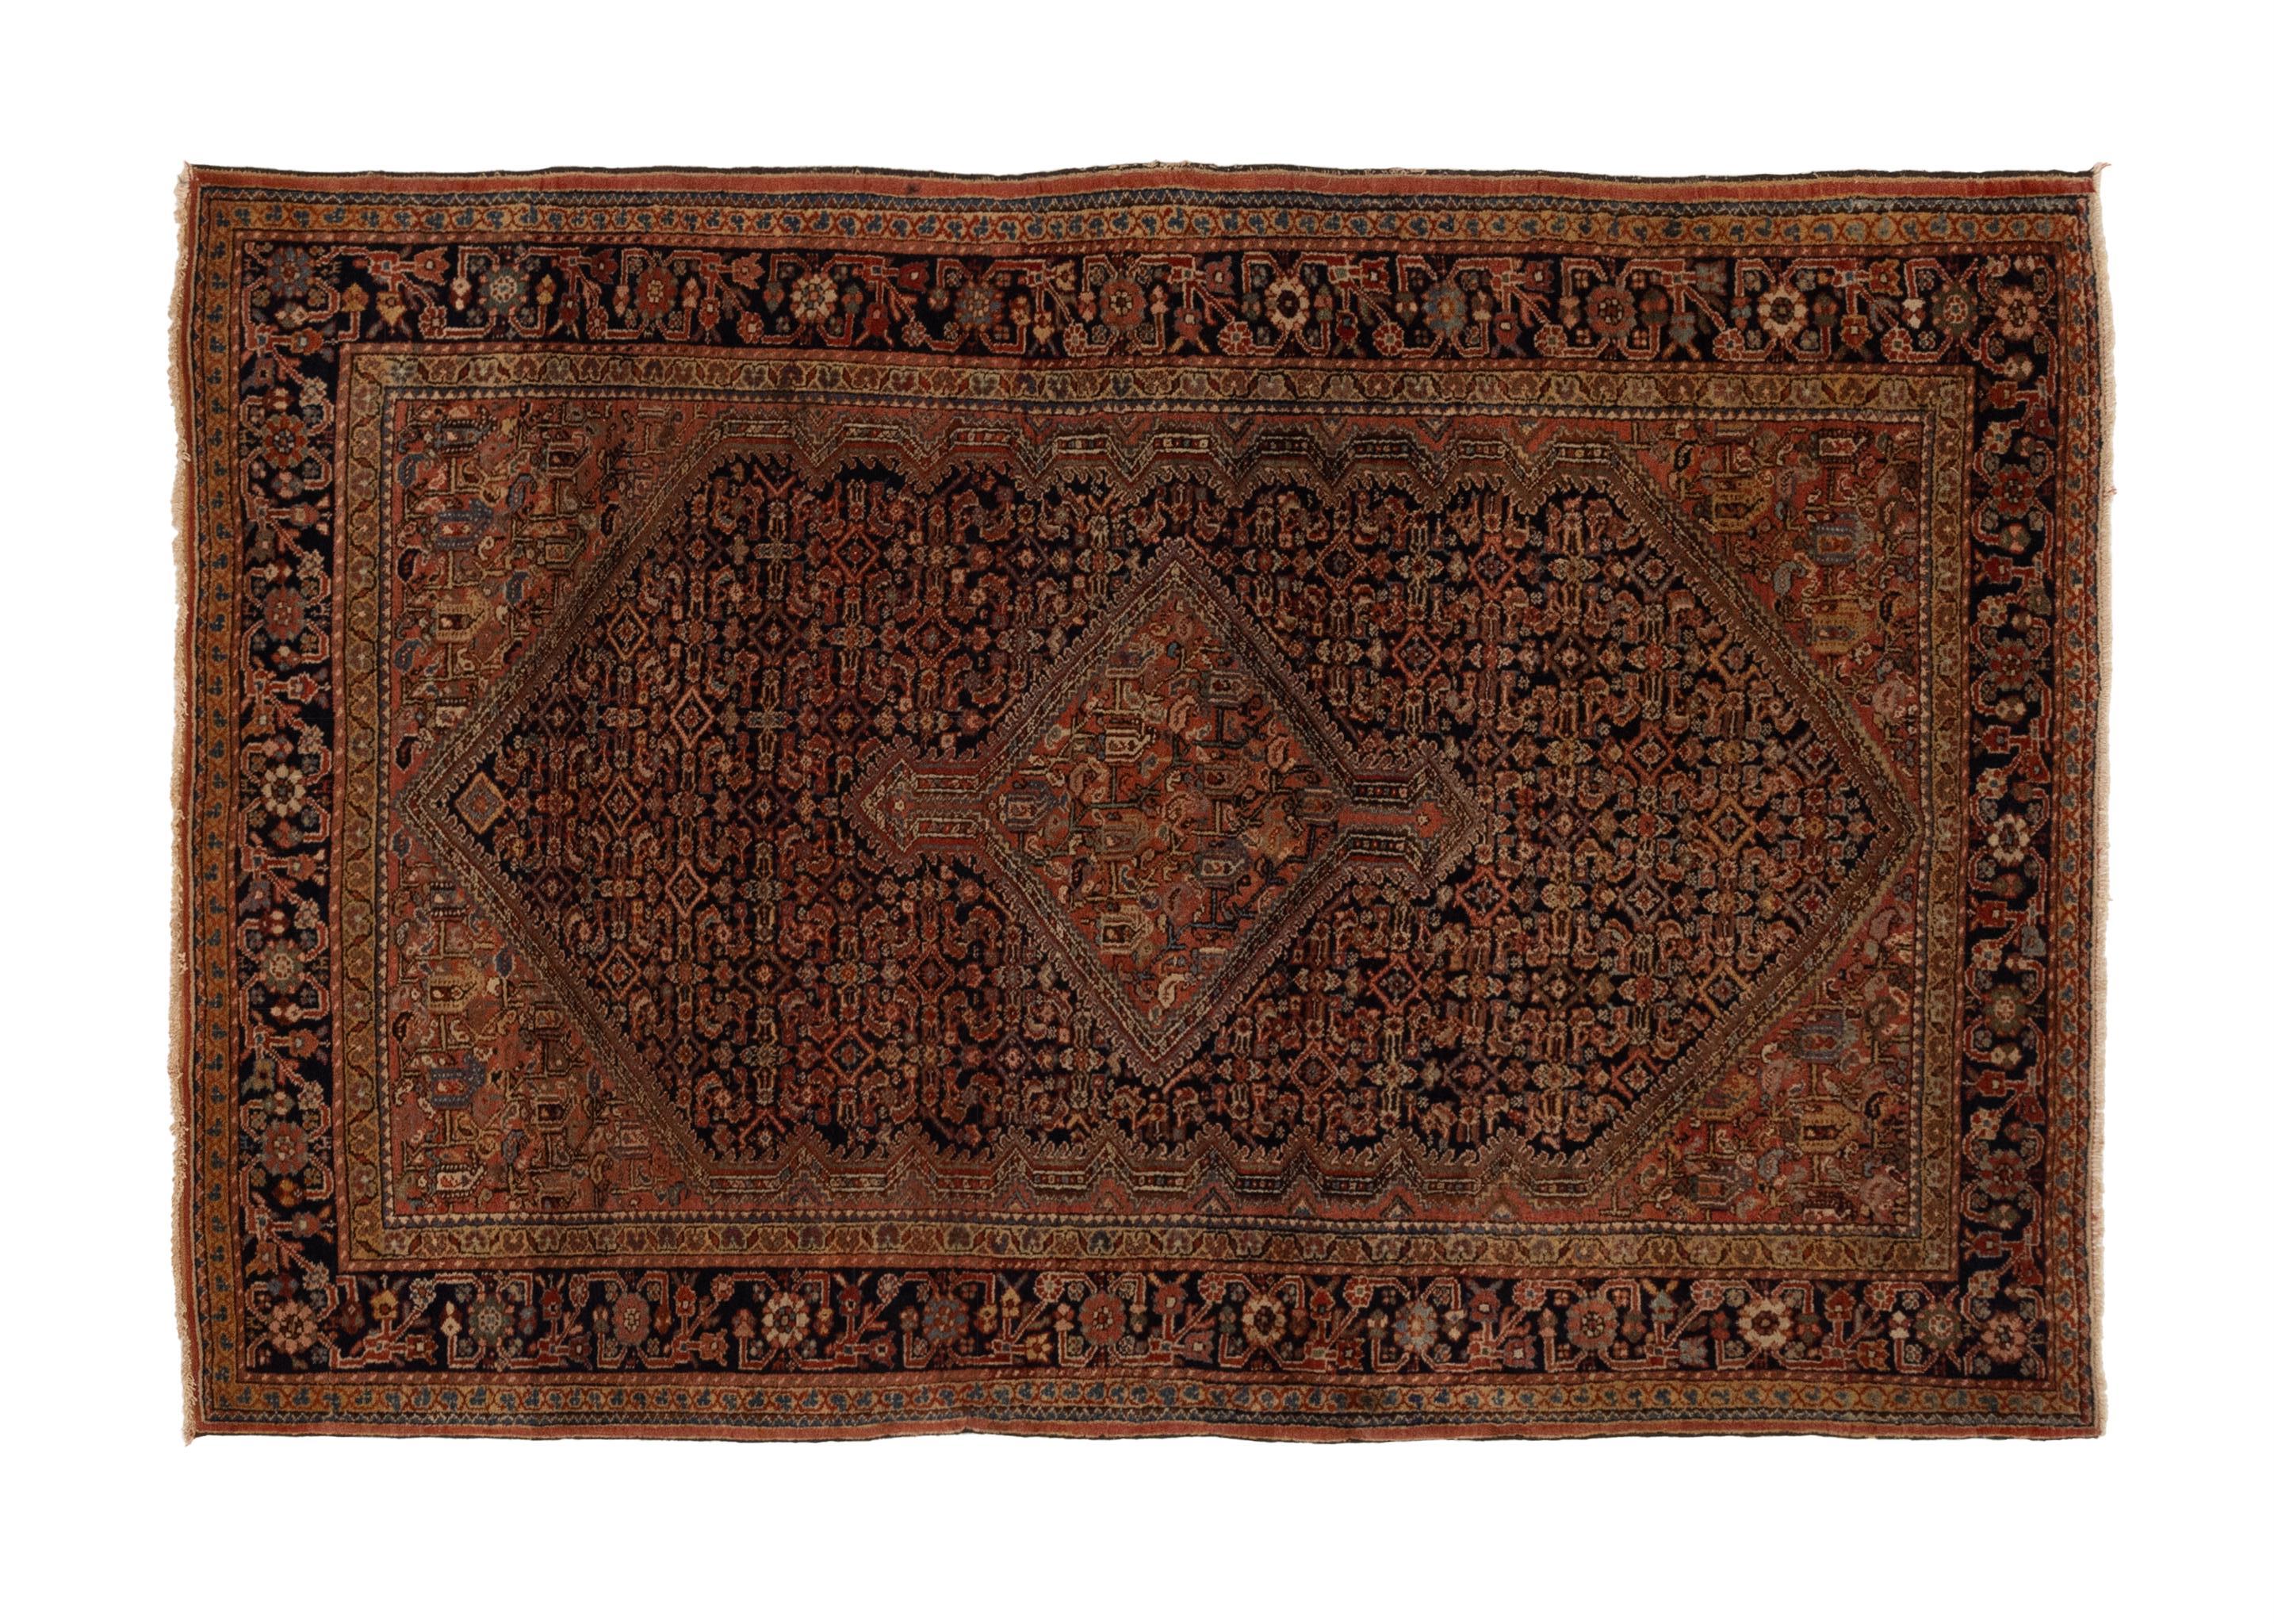 This exquisite antique traditional rug is a true testament to the timeless beauty and craftsmanship of the past. Handwoven with meticulous attention to detail, it features a captivating medallion center design, which is a hallmark of traditional rug